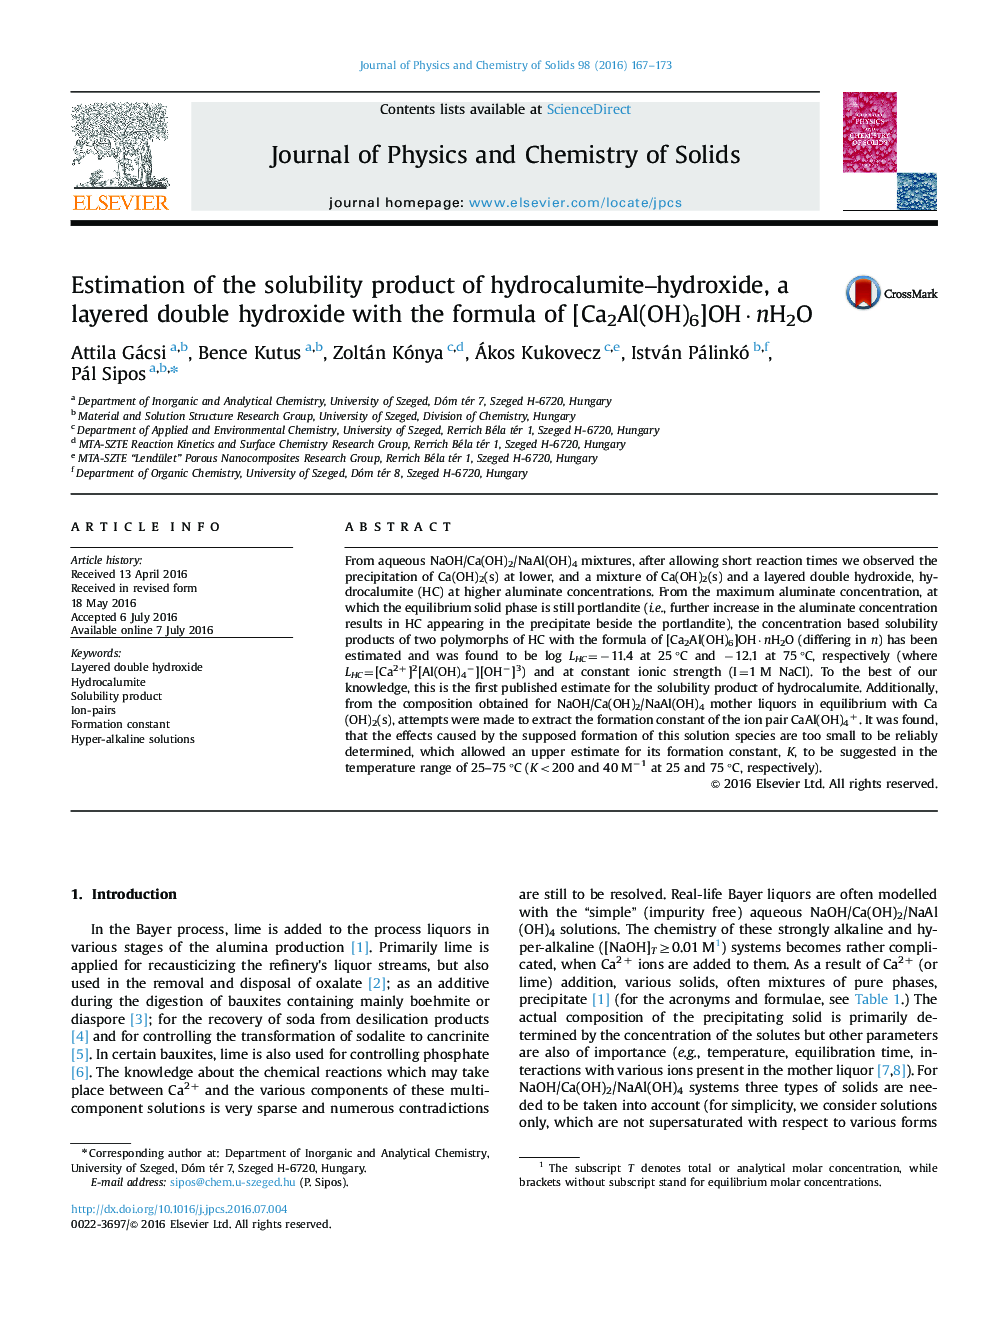 Estimation of the solubility product of hydrocalumite–hydroxide, a layered double hydroxide with the formula of [Ca2Al(OH)6]OH·nH2O